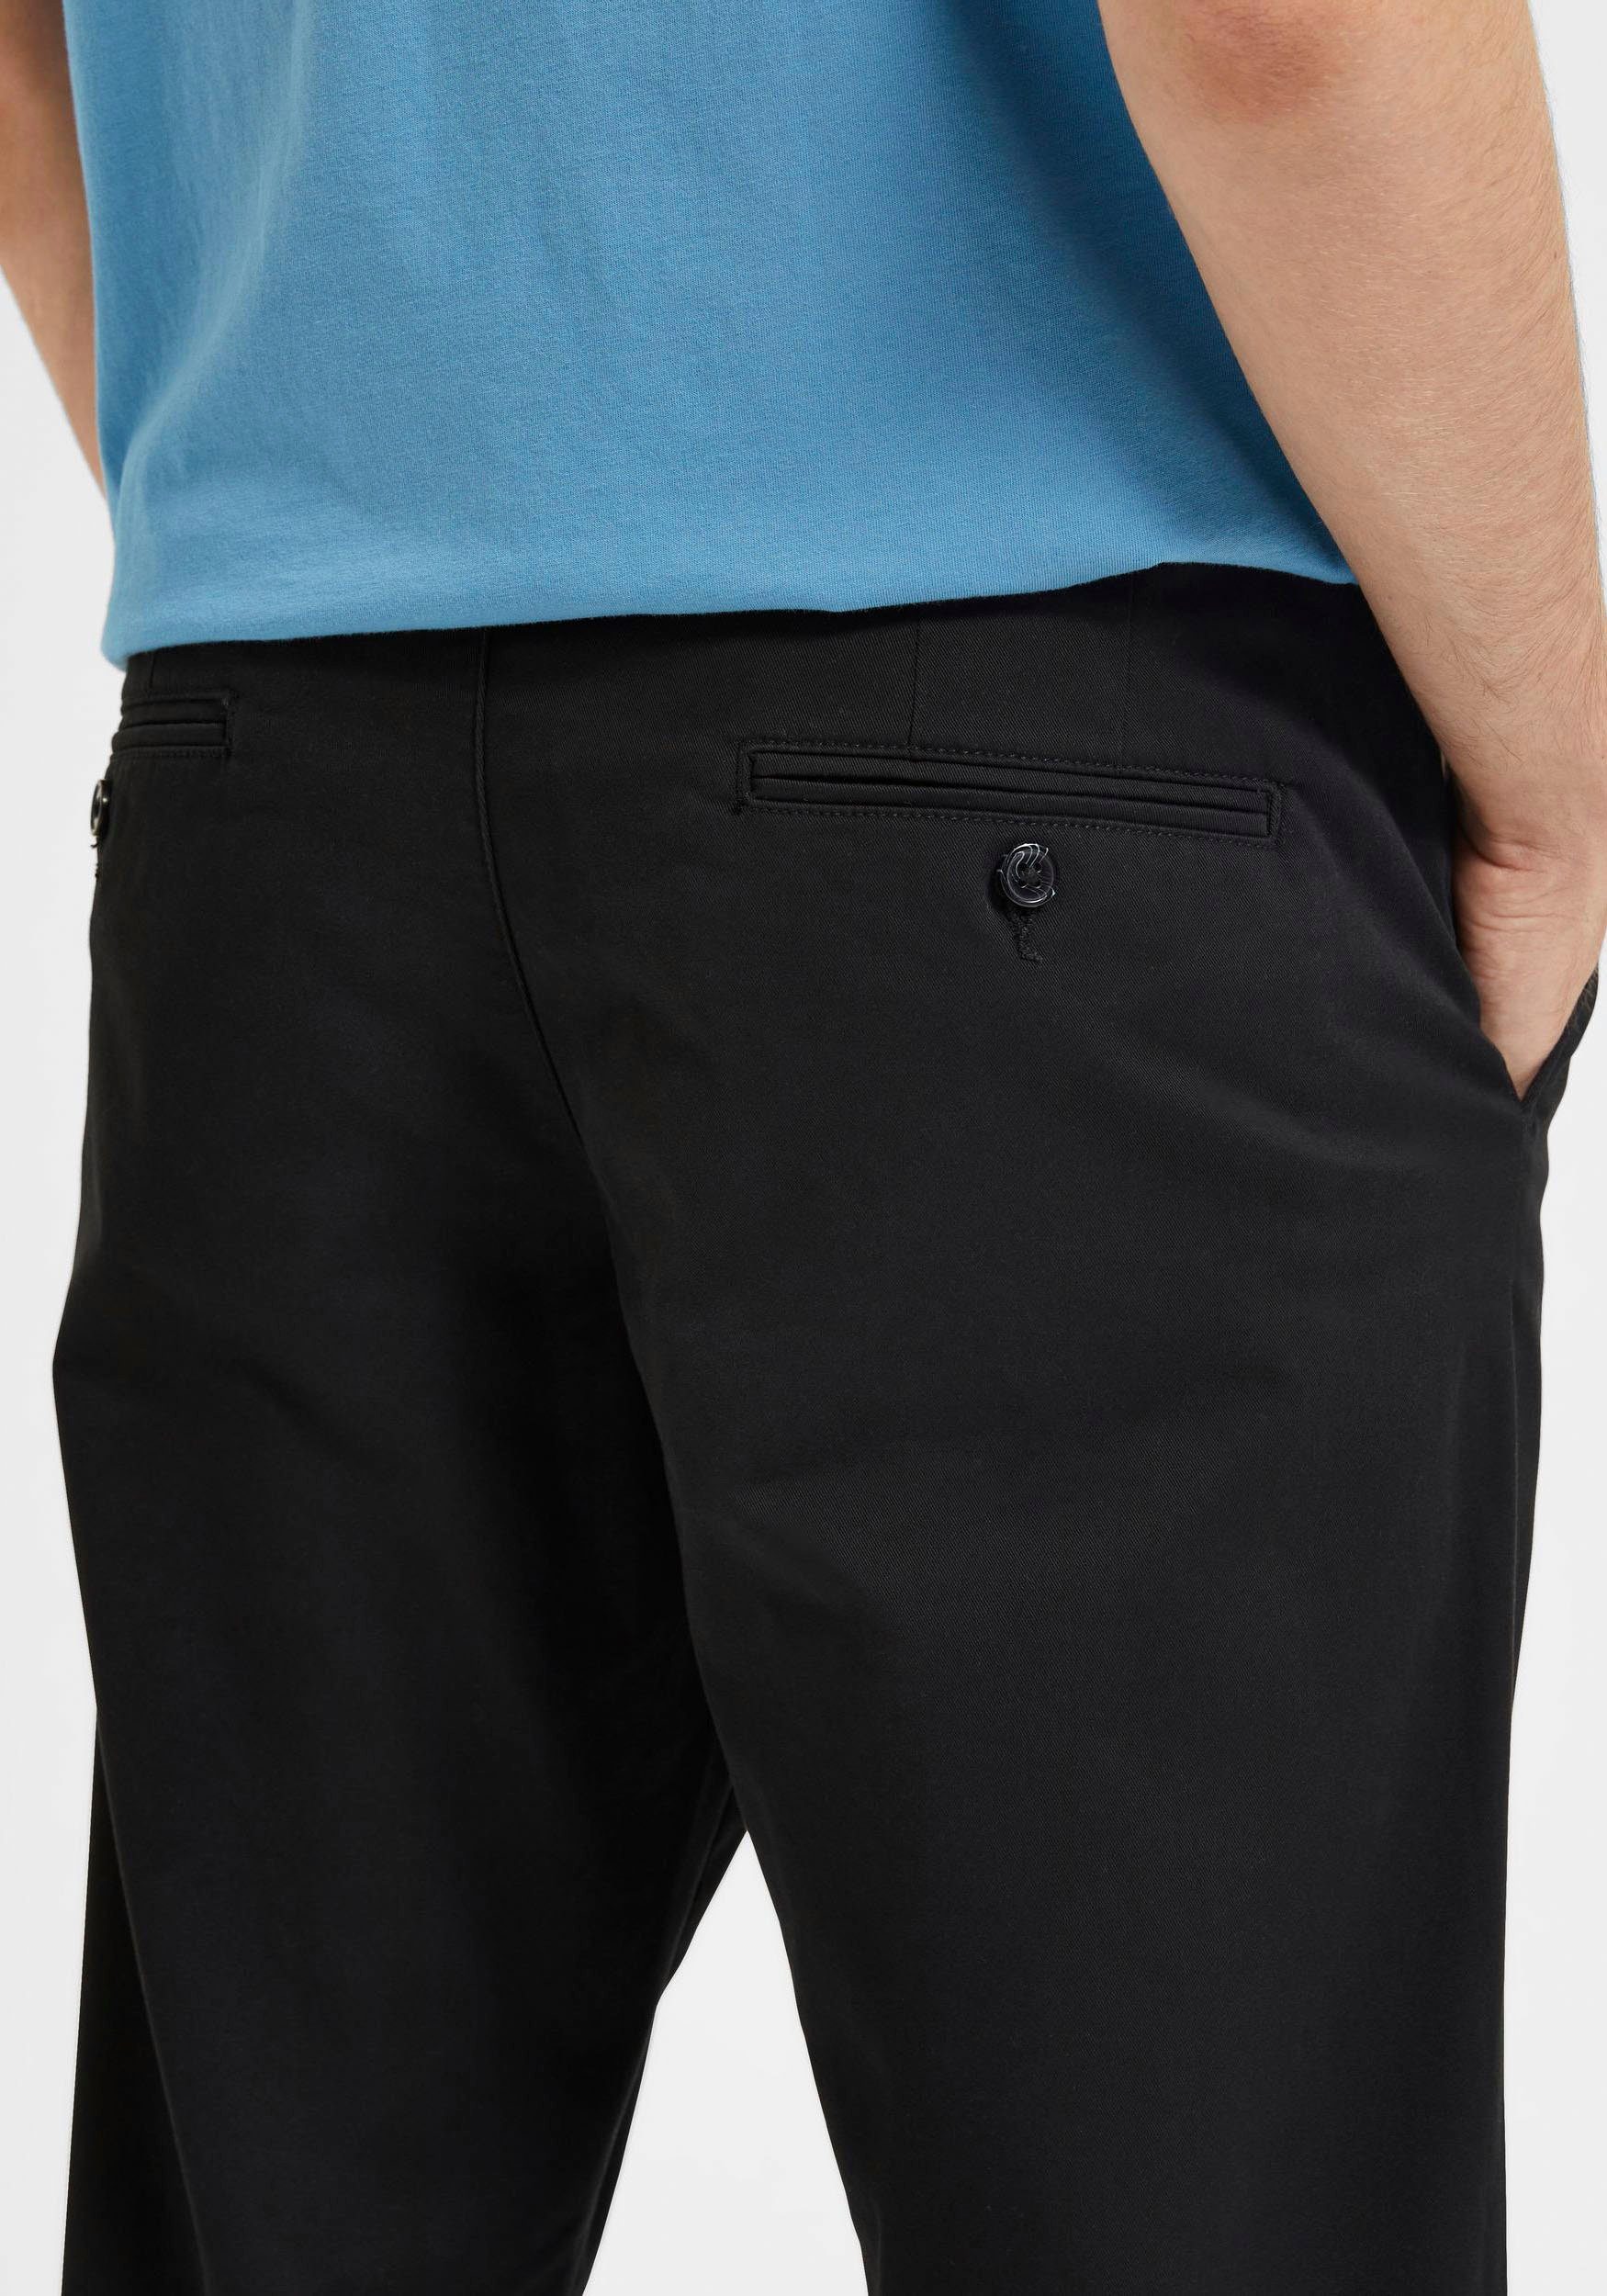 PANT SELECTED Chinohose FLEX black HOMME NEW SLH175-SLIM NOOS MILES